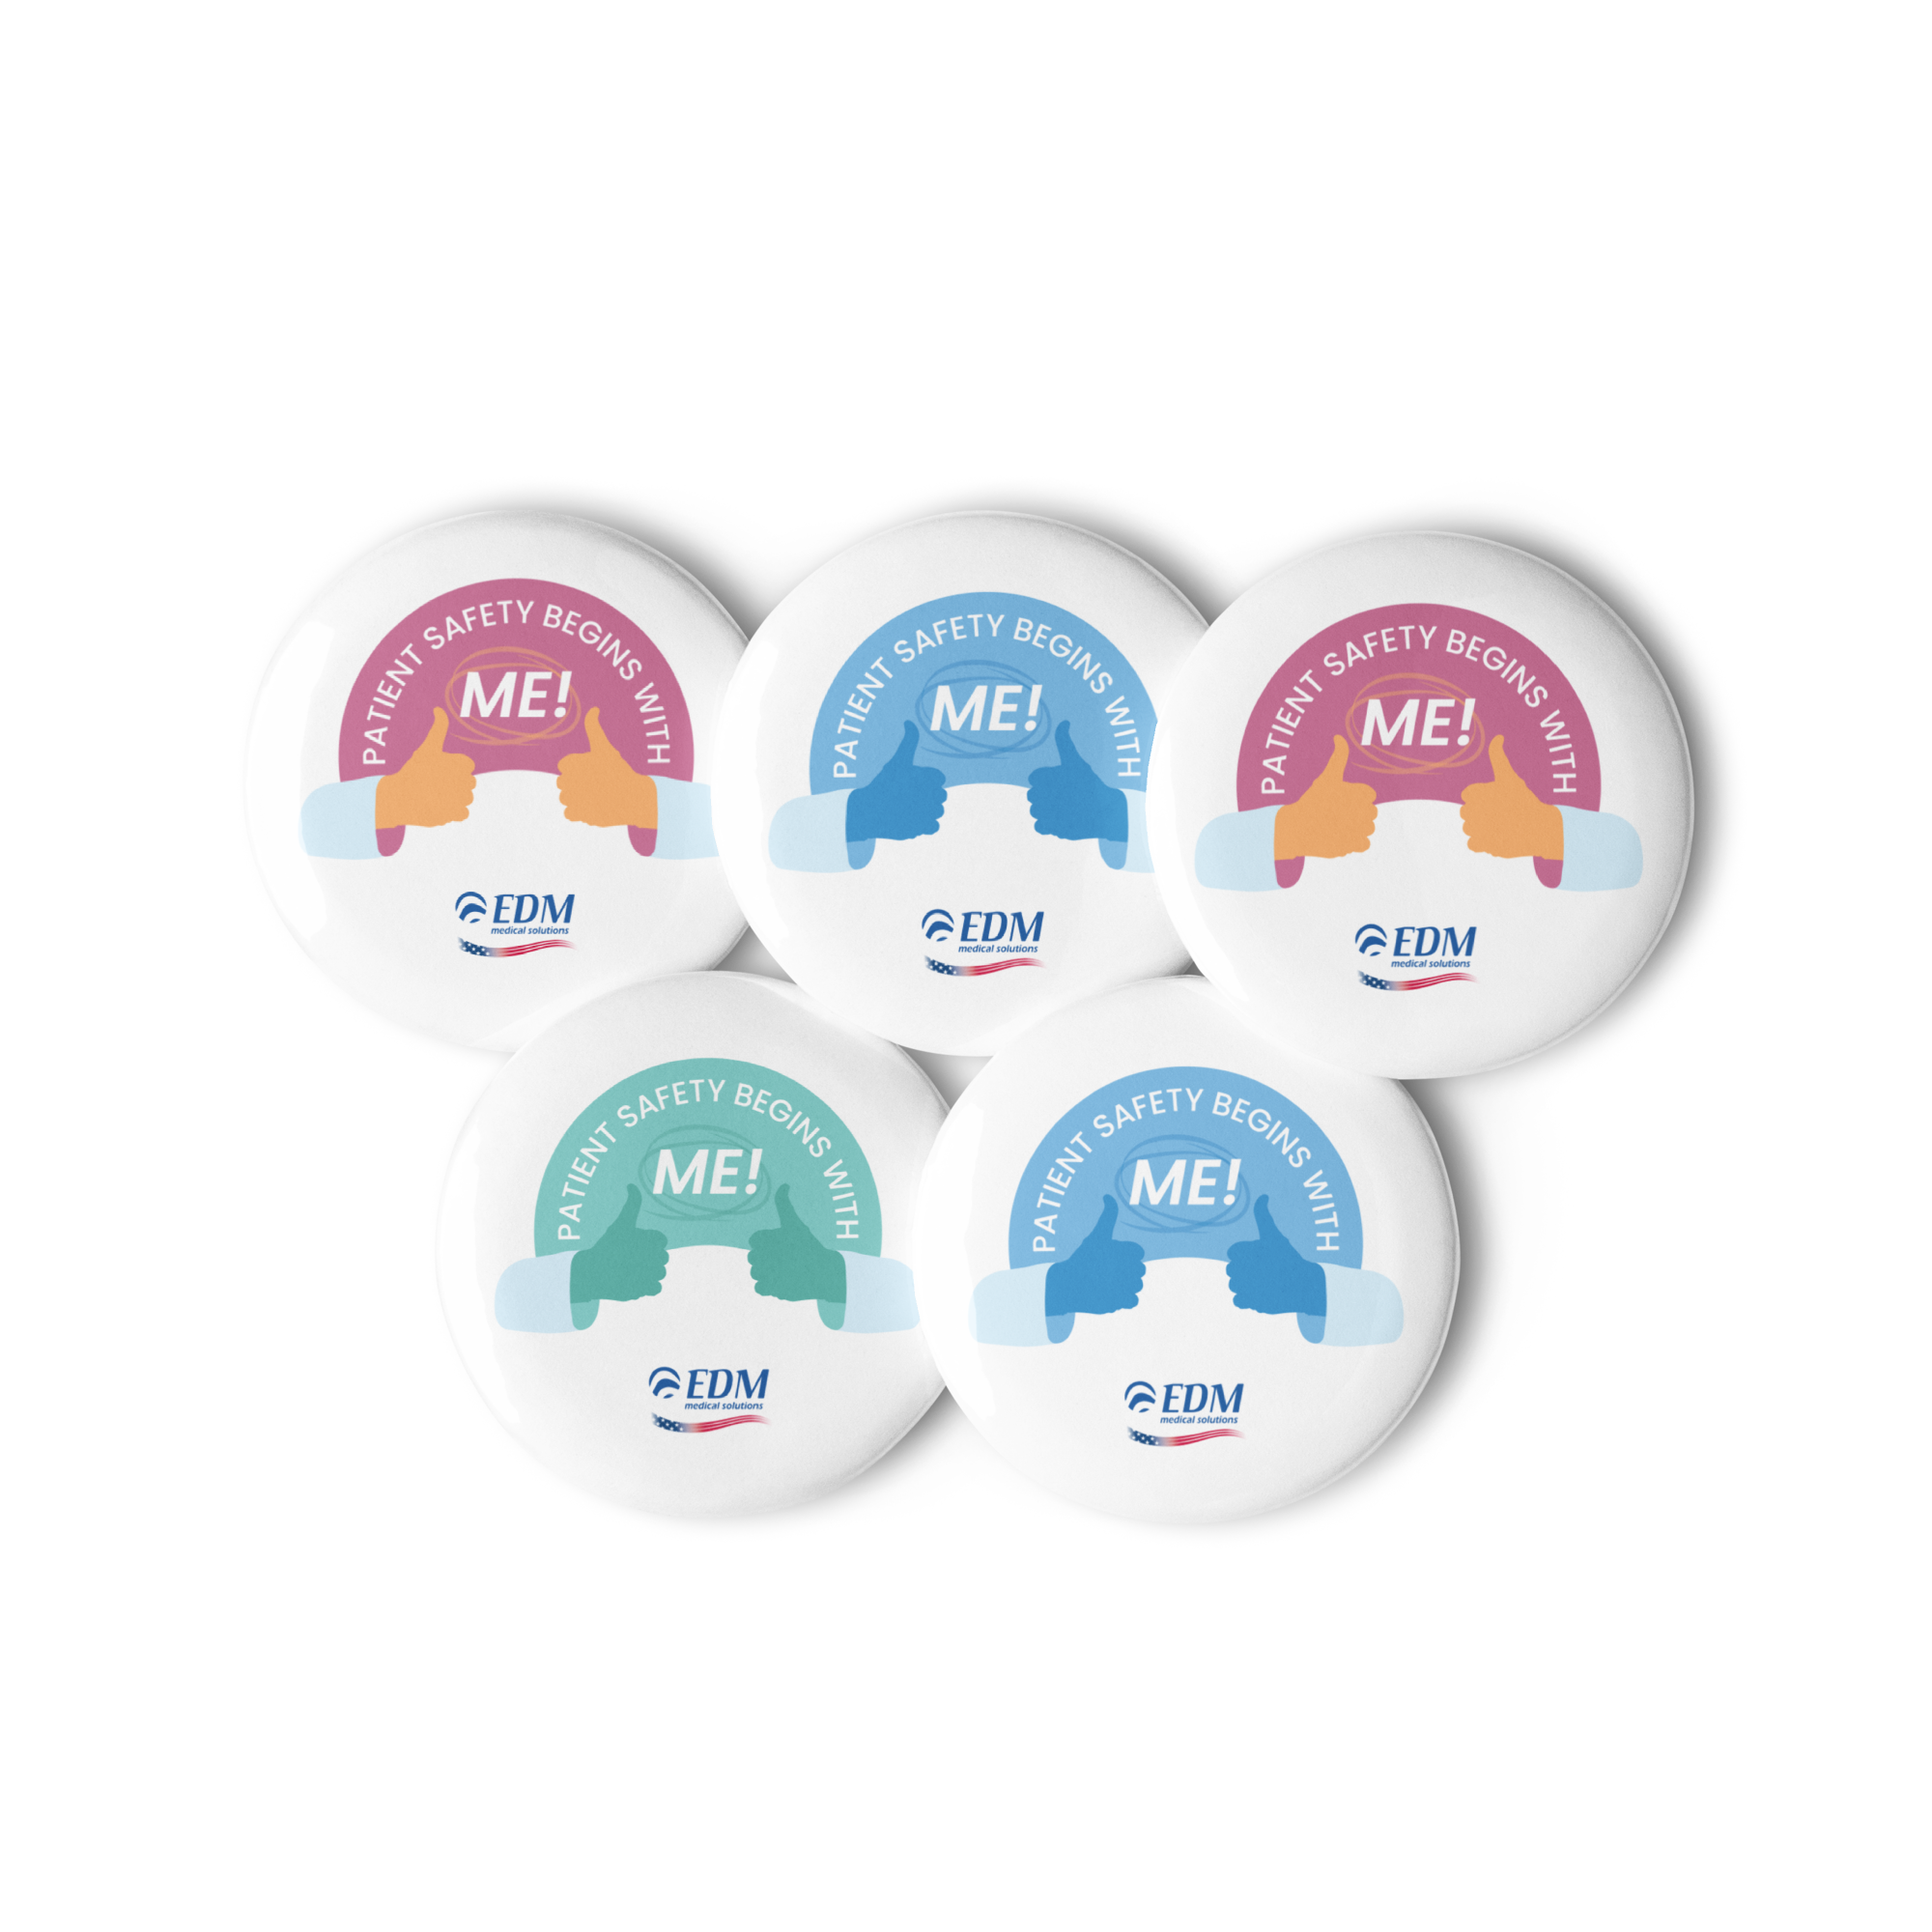 Set of Pin Buttons - Patient Safety Begins With Me!